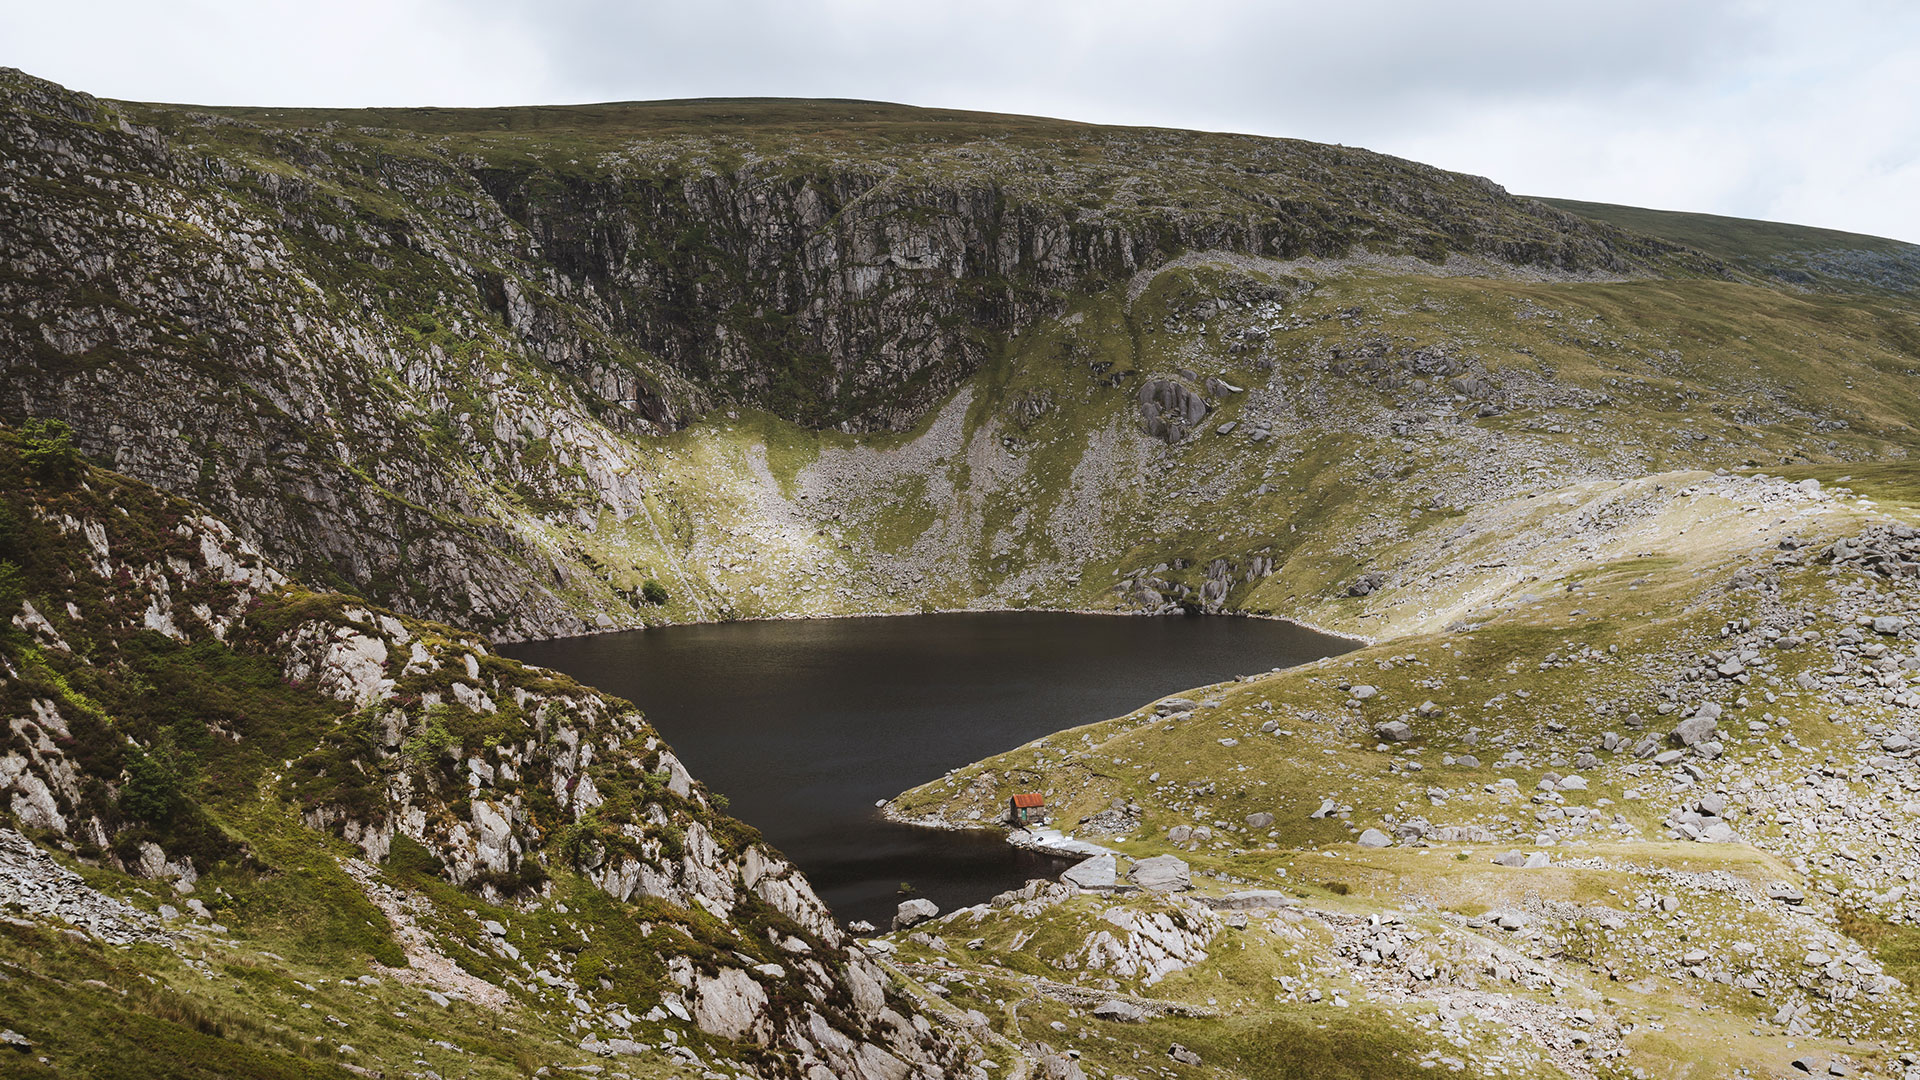 Cliff faces around a small lake in the Carneddau